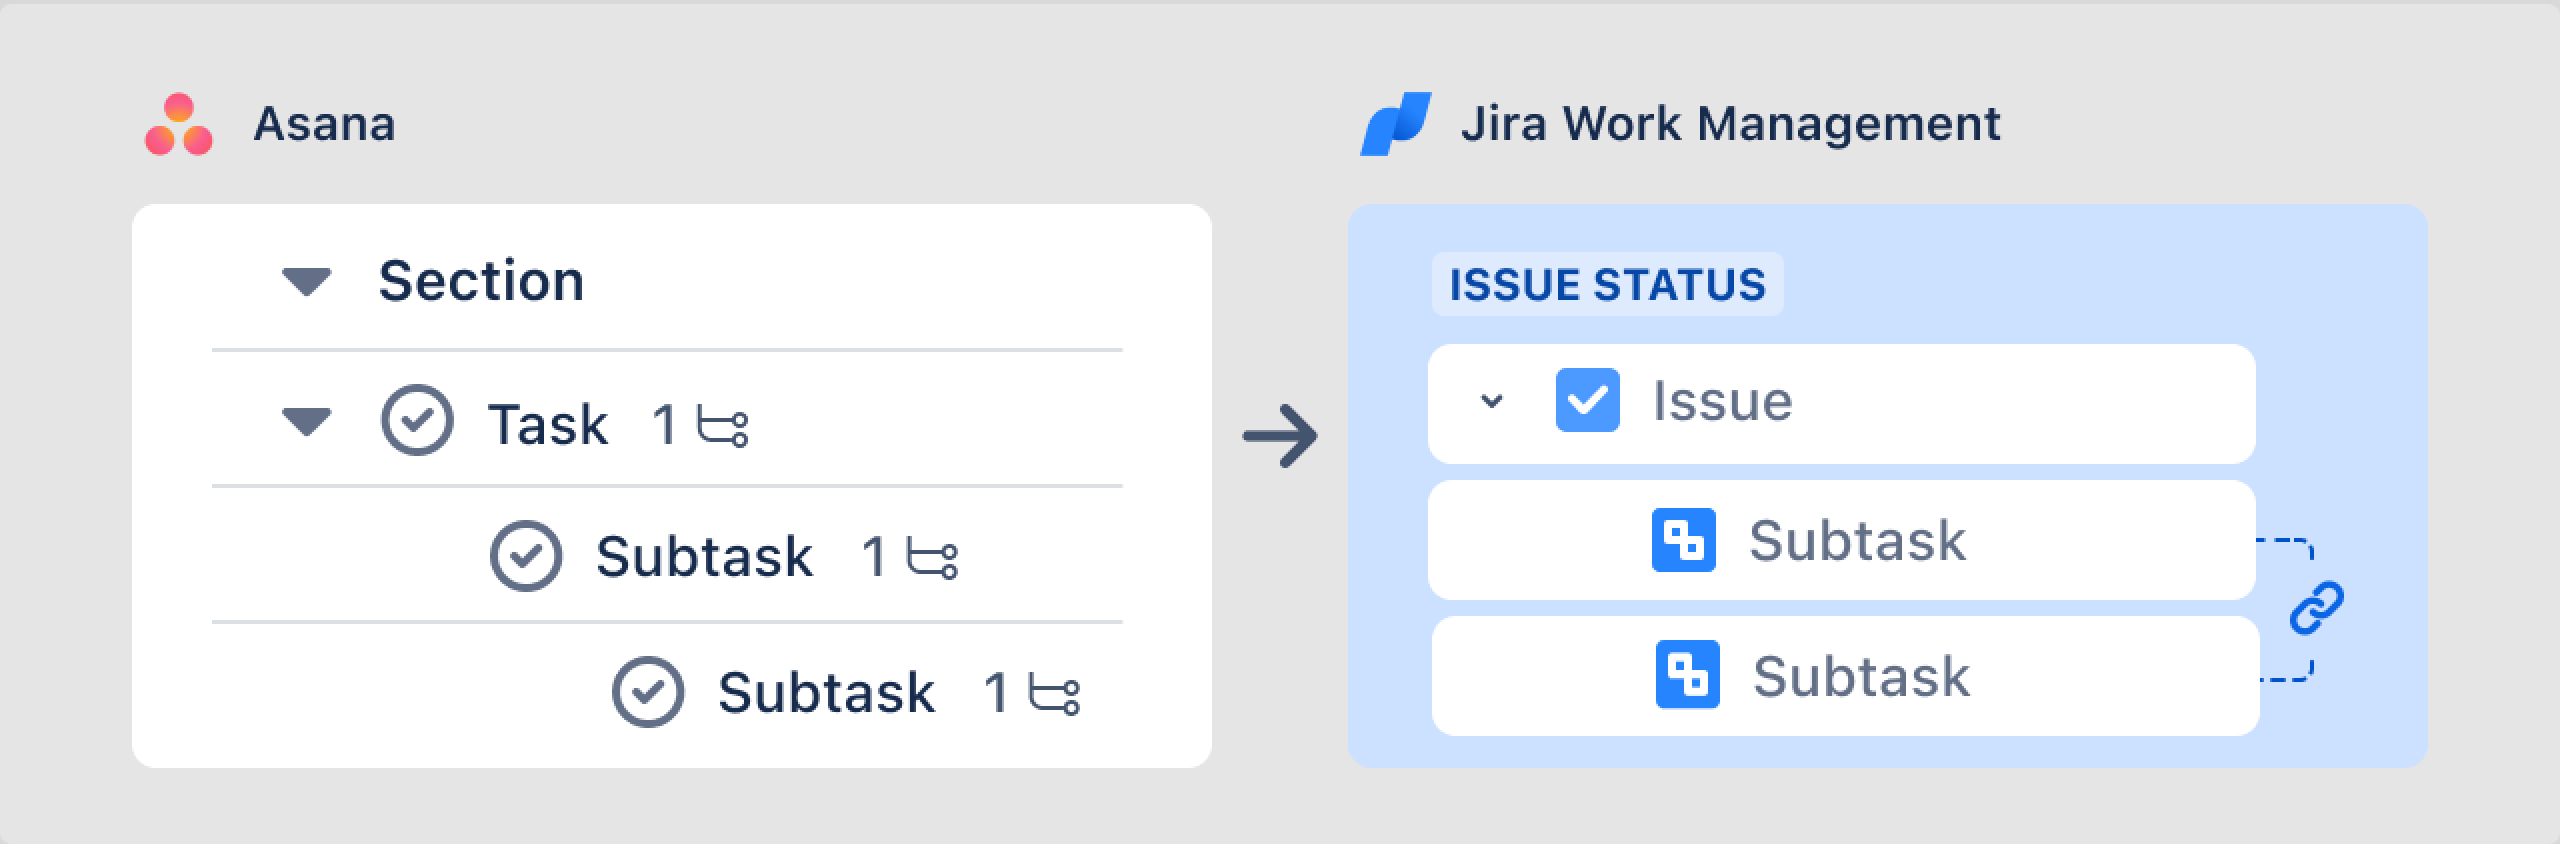 Visualization of how Asana fields are mapped to Jira Work Management.